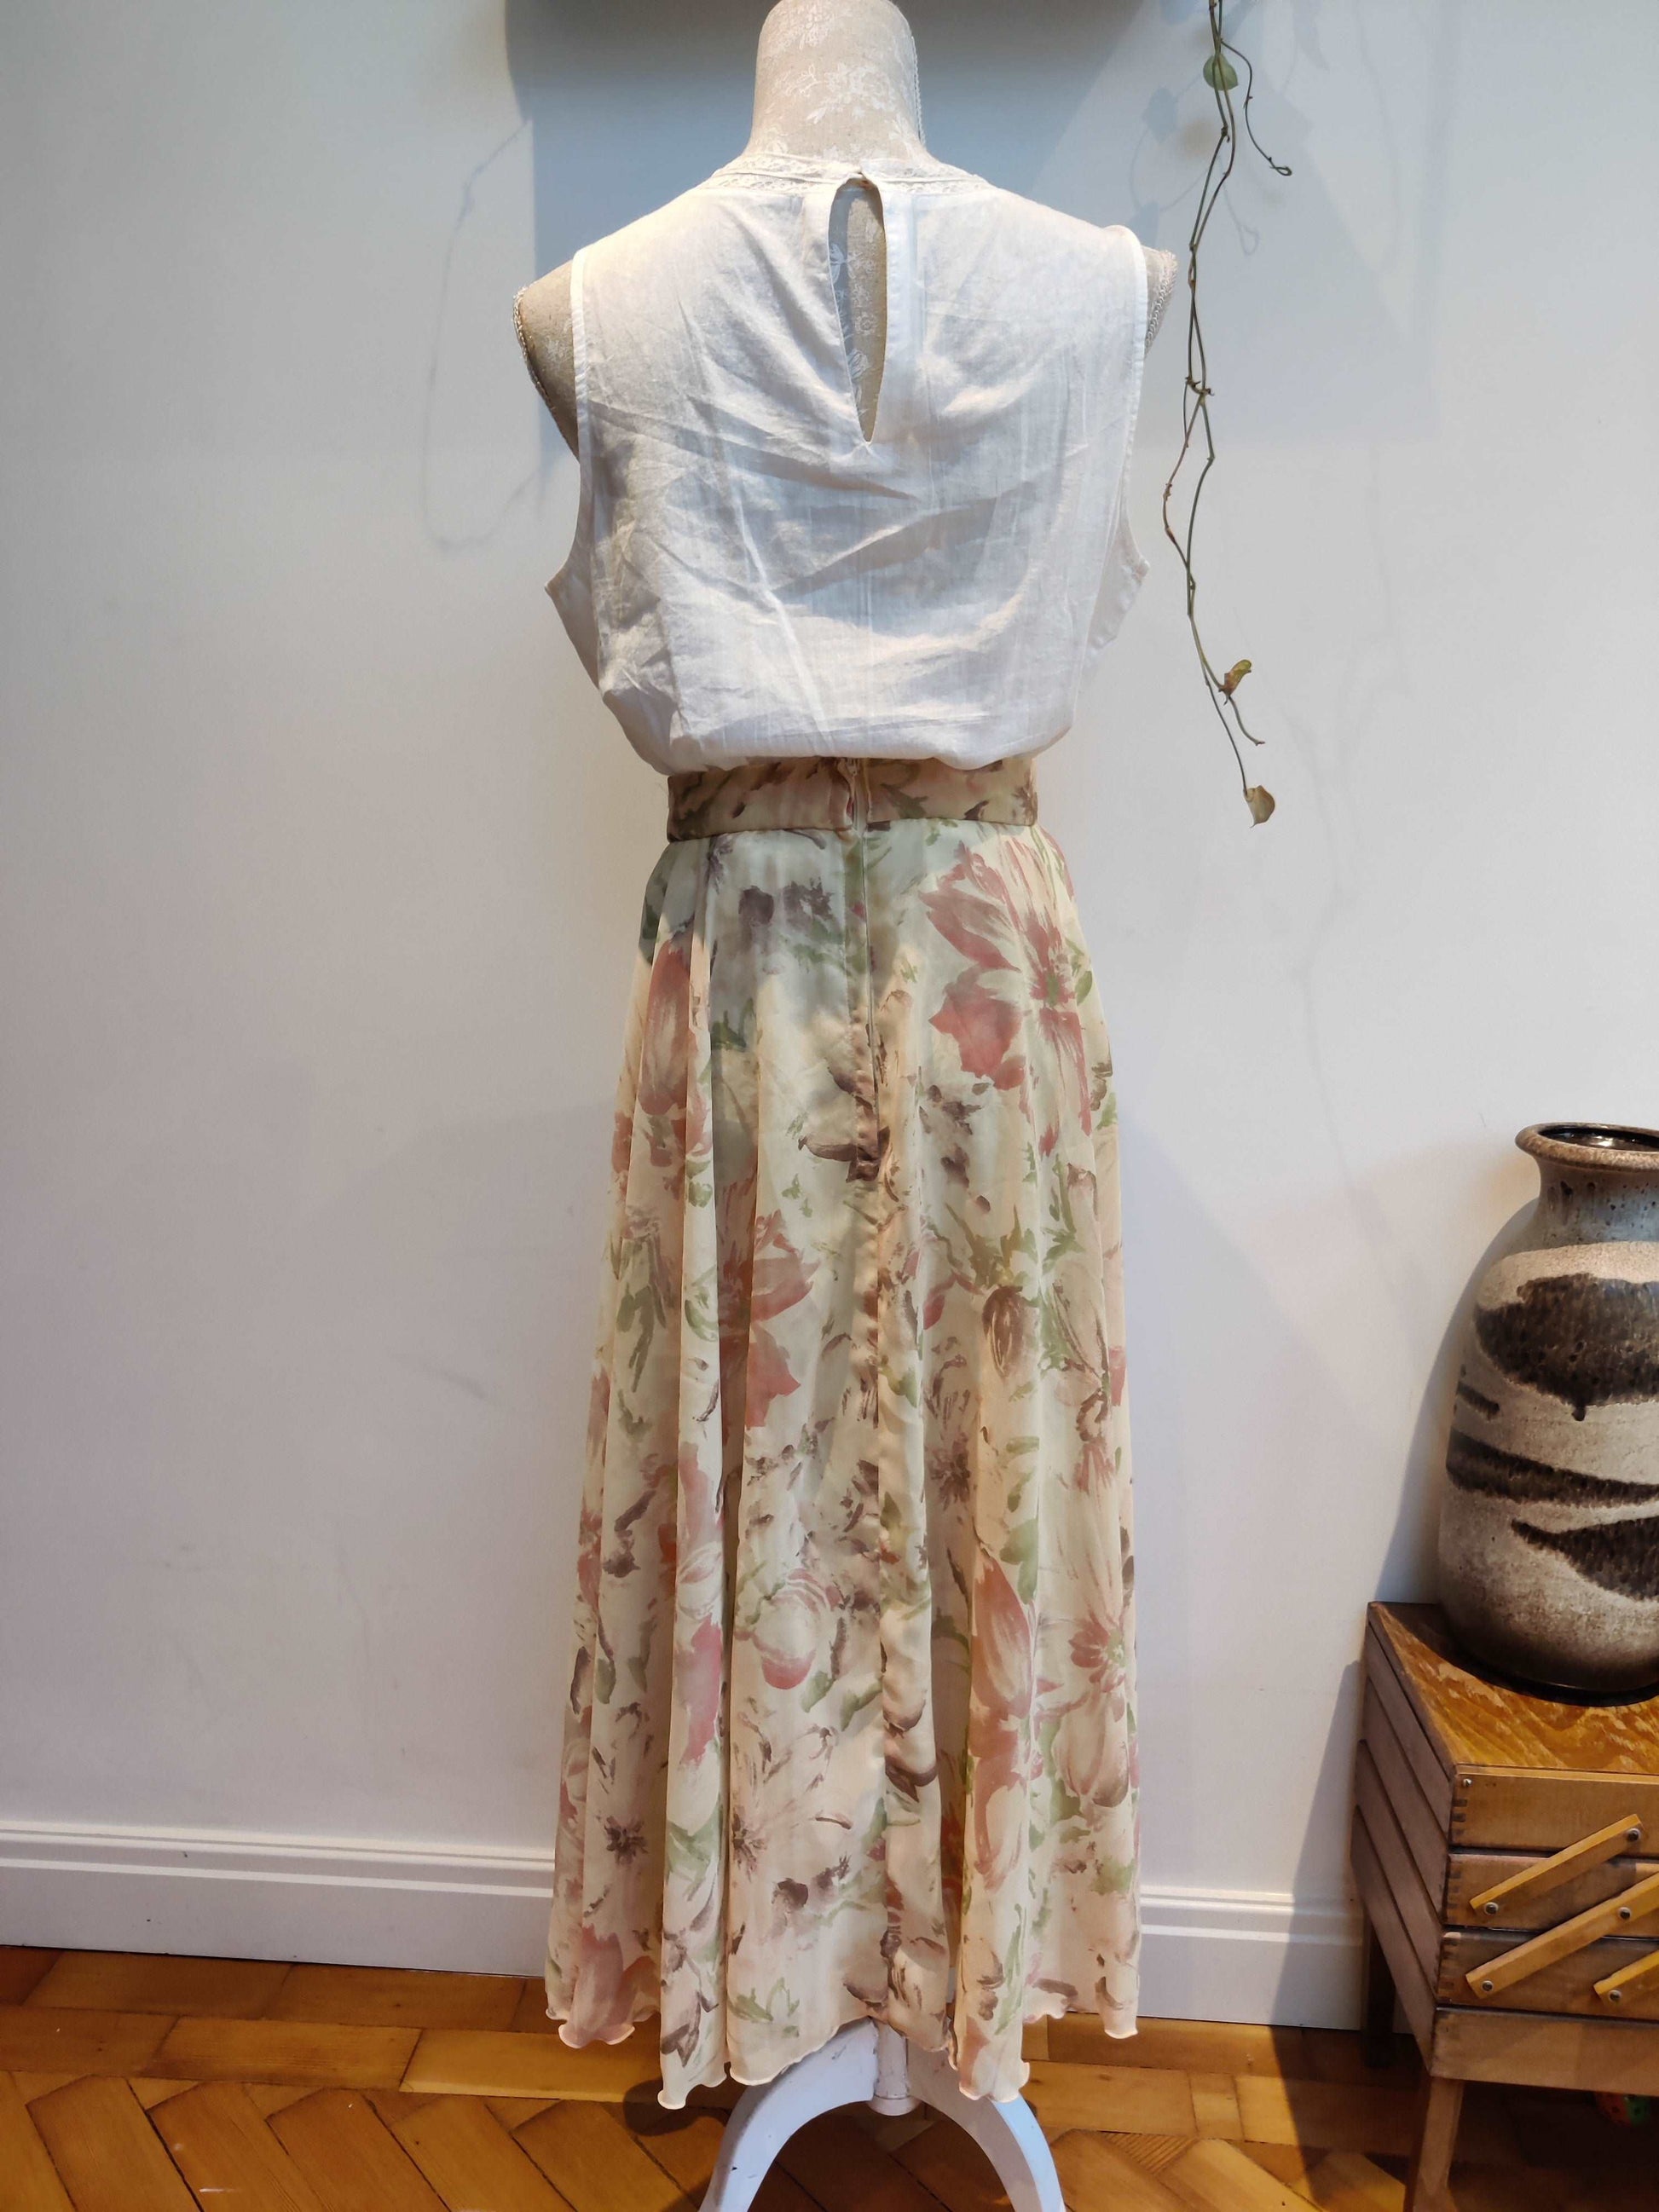 Stunning pink and cream floral skirt. perfect for weddings.